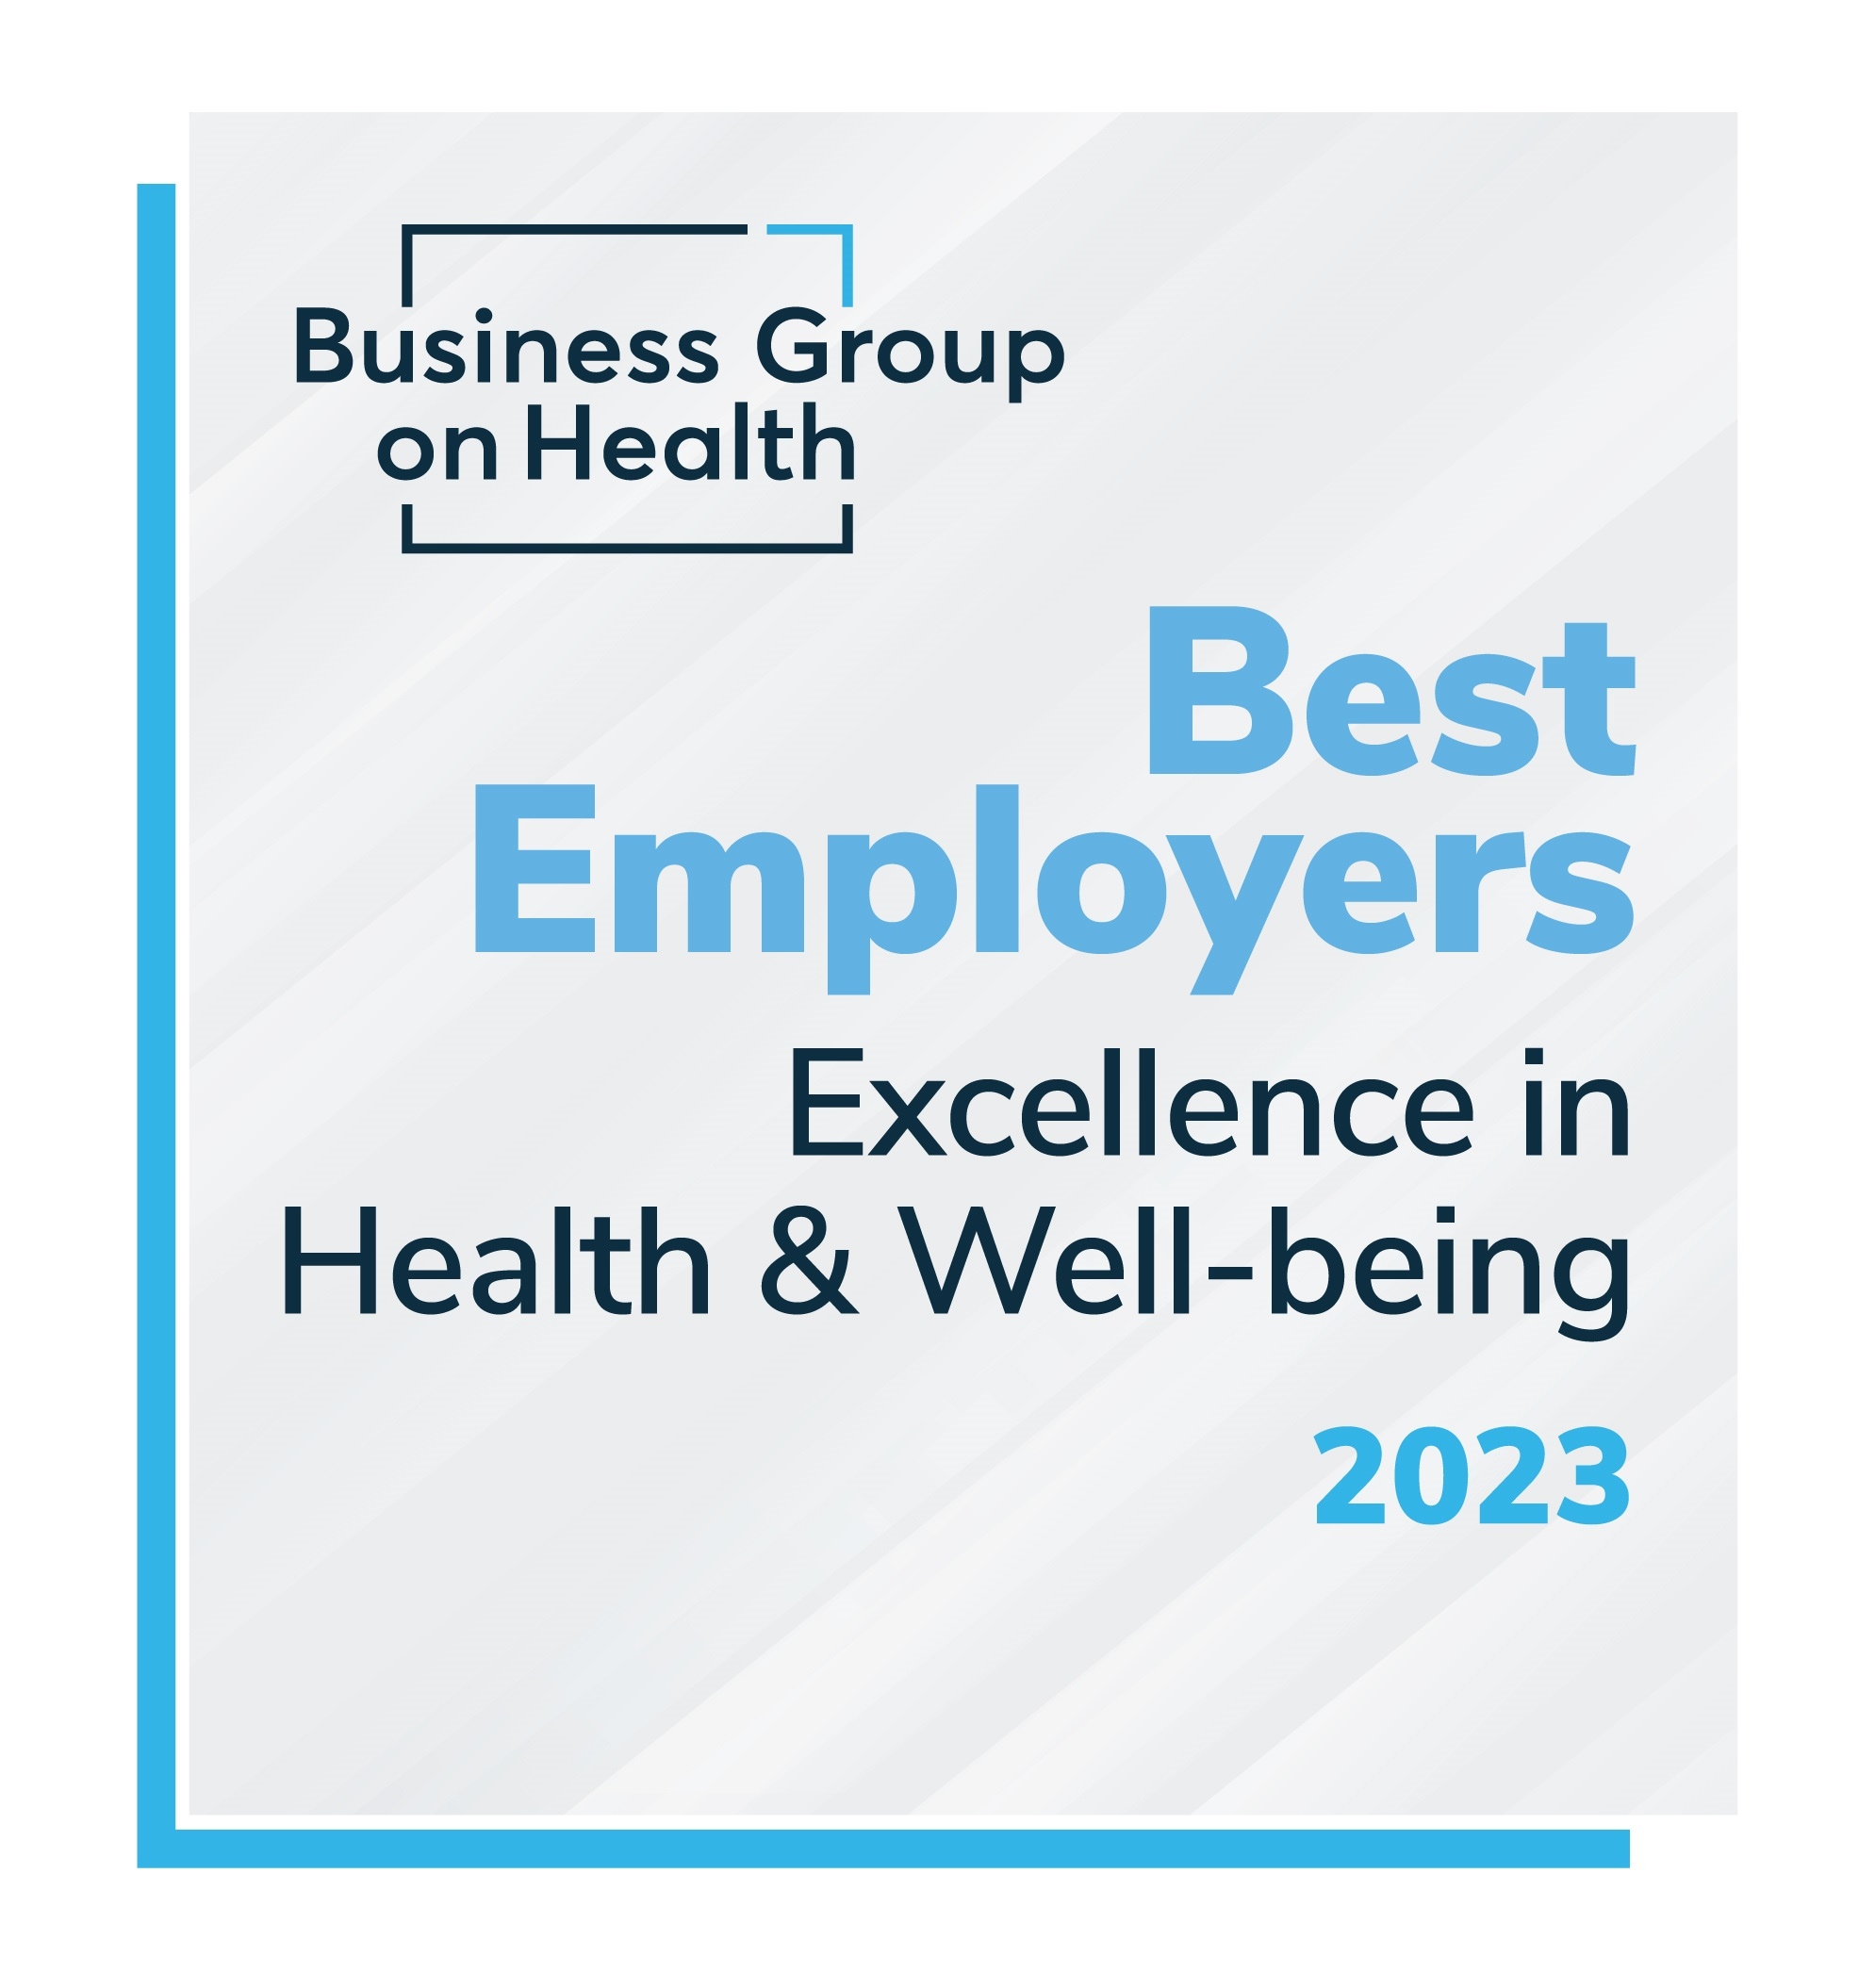 Business Group on Health Best Employers 2023